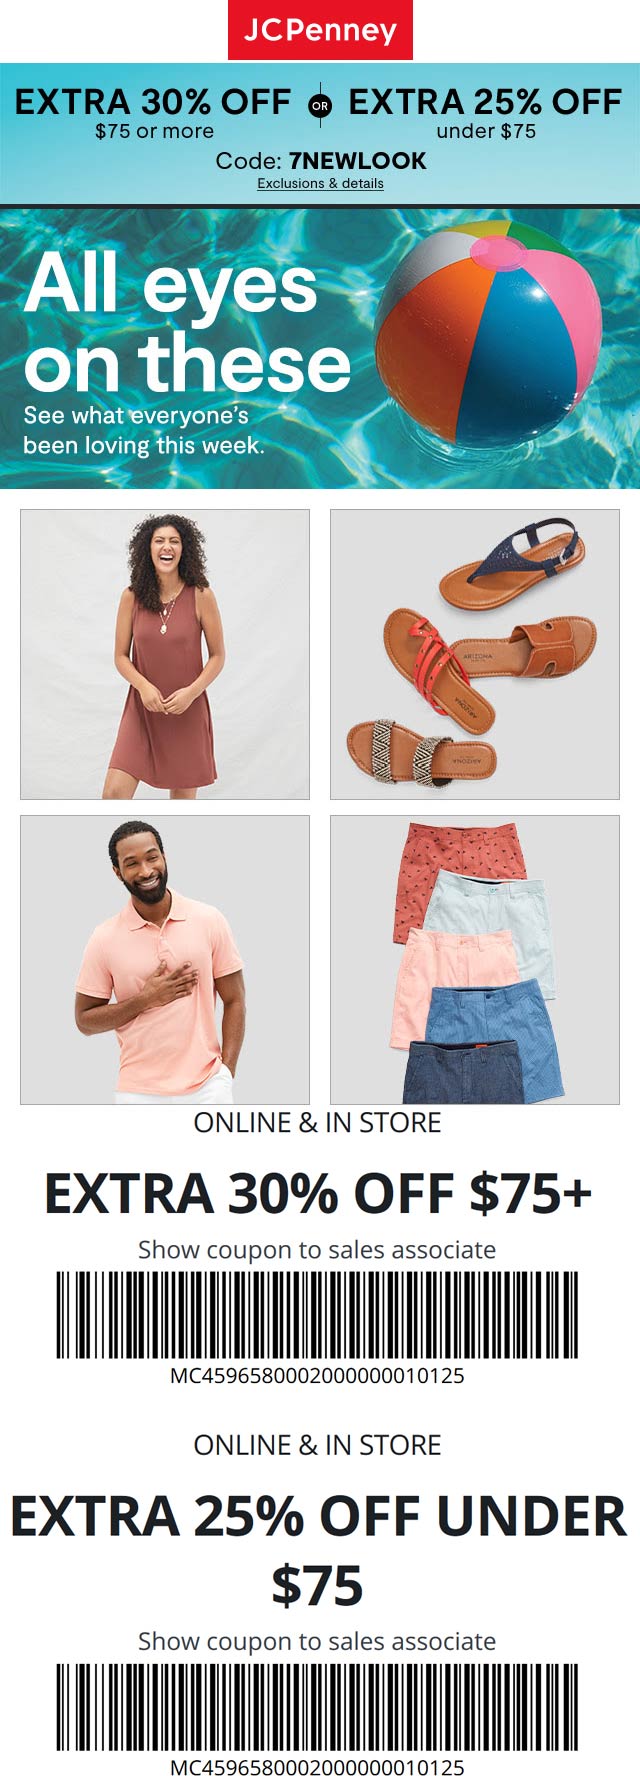 JCPenney stores Coupon  Extra 25-30% off at JCPenney, or online via promo code HOORAY9 #jcpenney